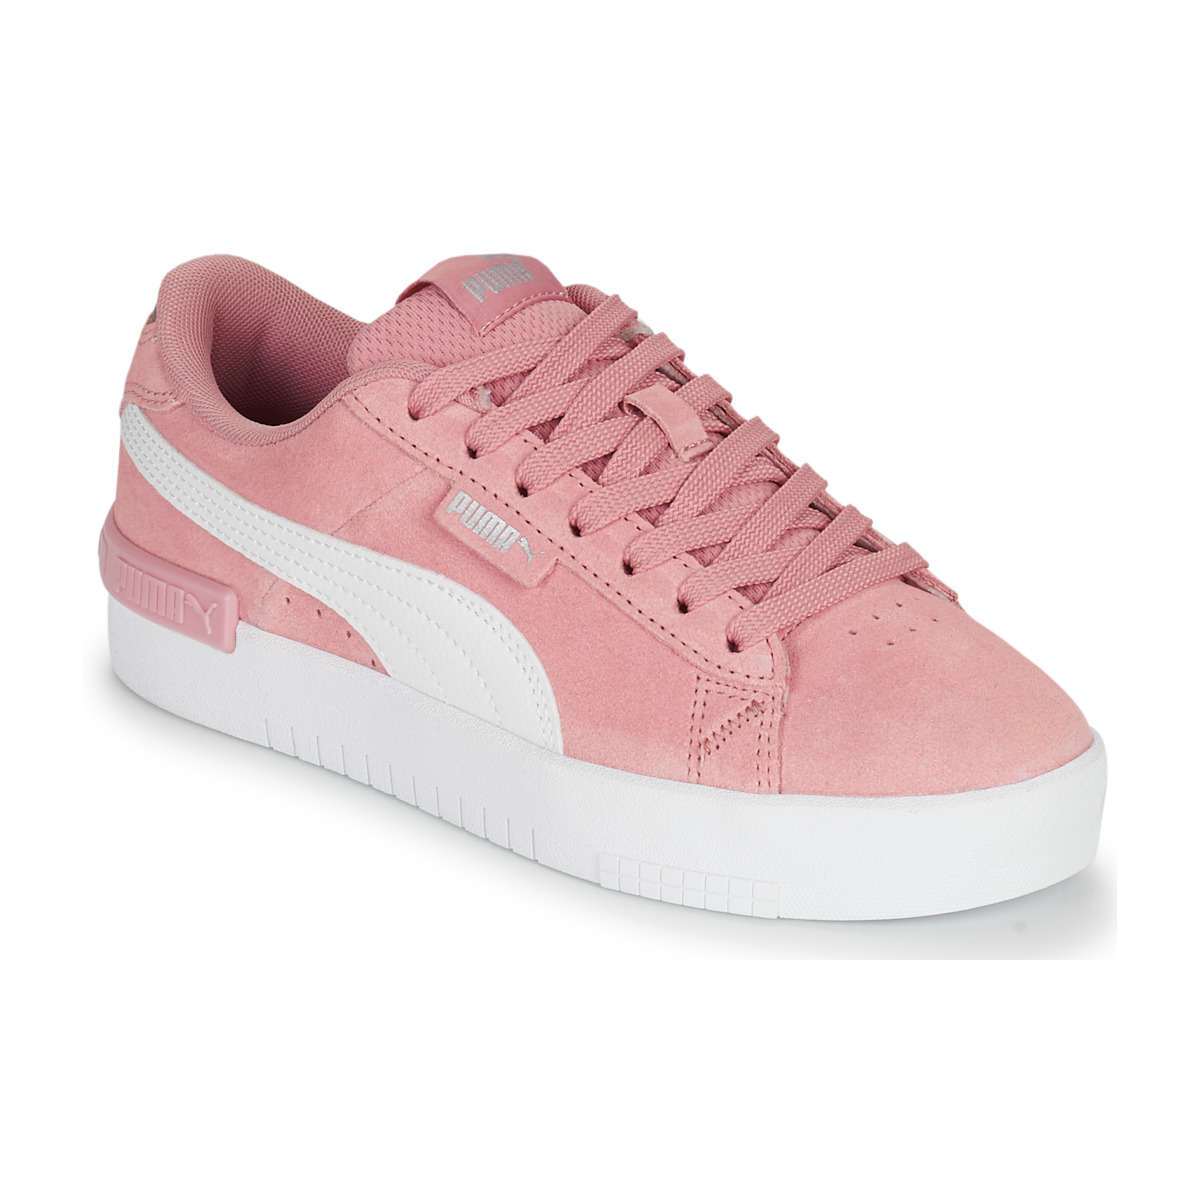 - JADA Shoes Spartoo Puma Free / | ! Women top Pink delivery NET trainers Low - White